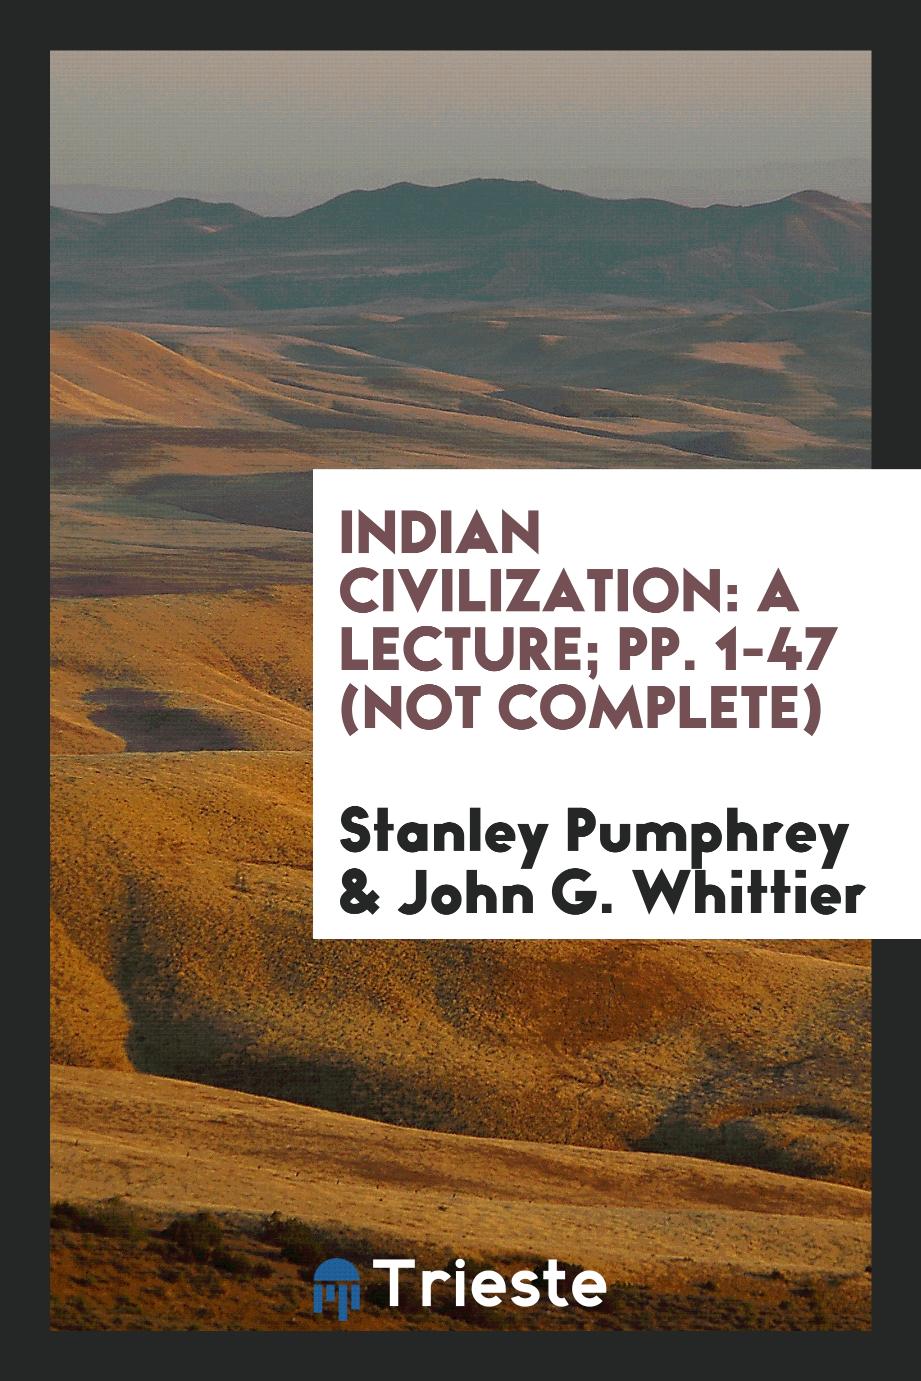 Indian Civilization: A Lecture; pp. 1-47 (Not complete)